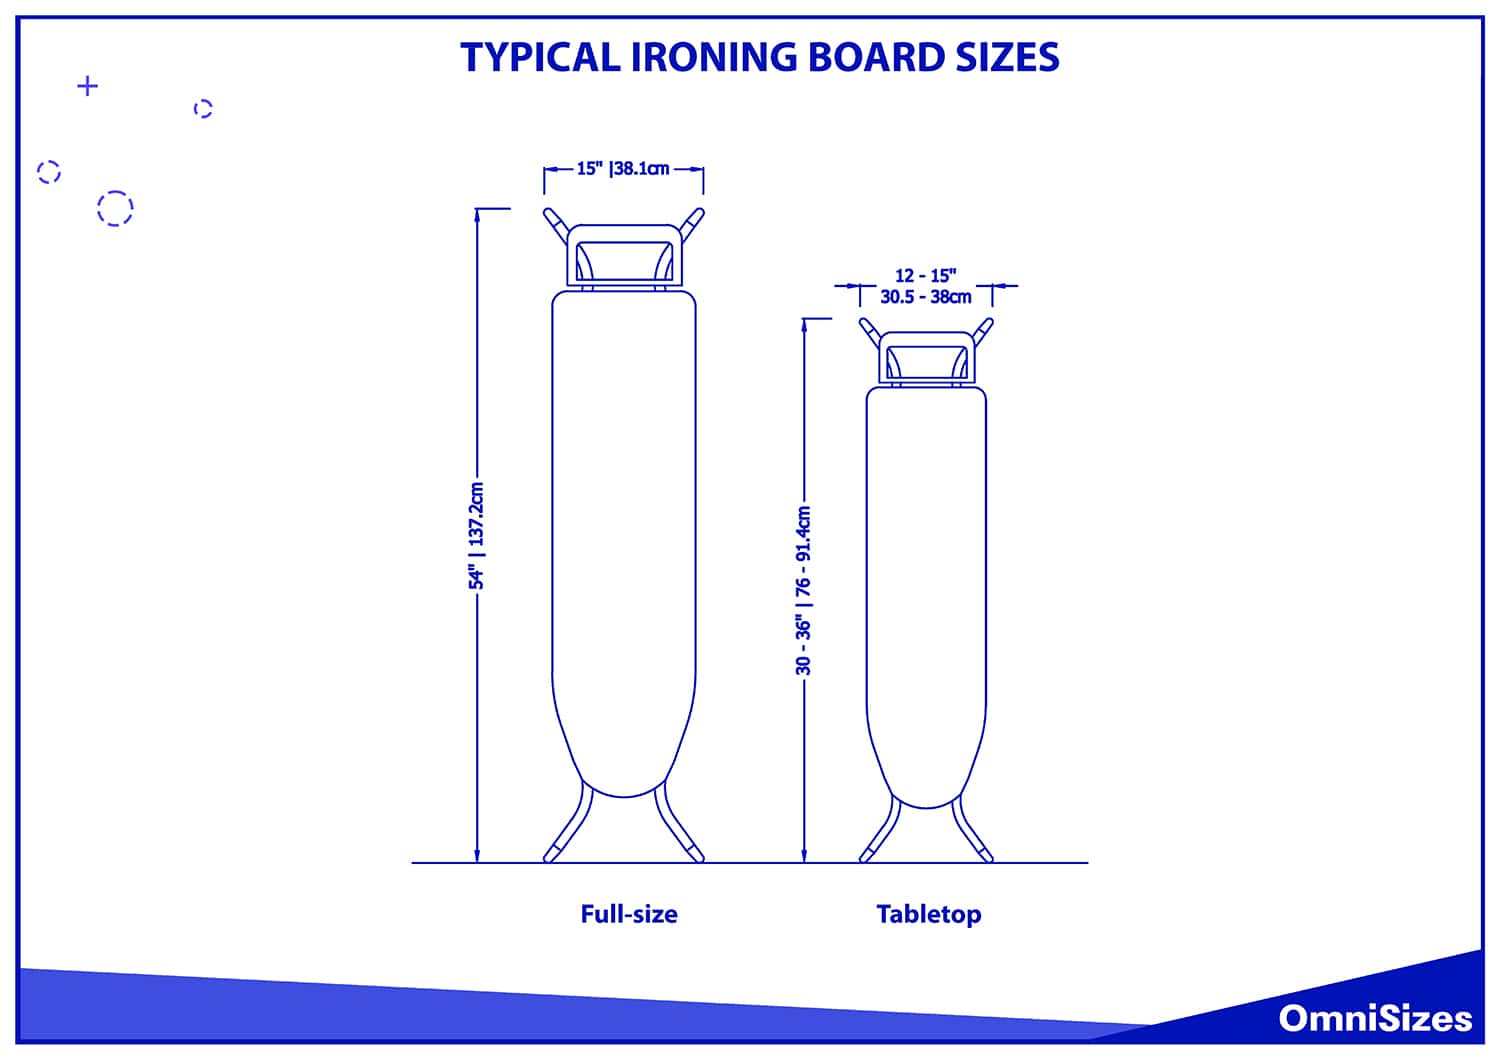 Typical ironing board sizes